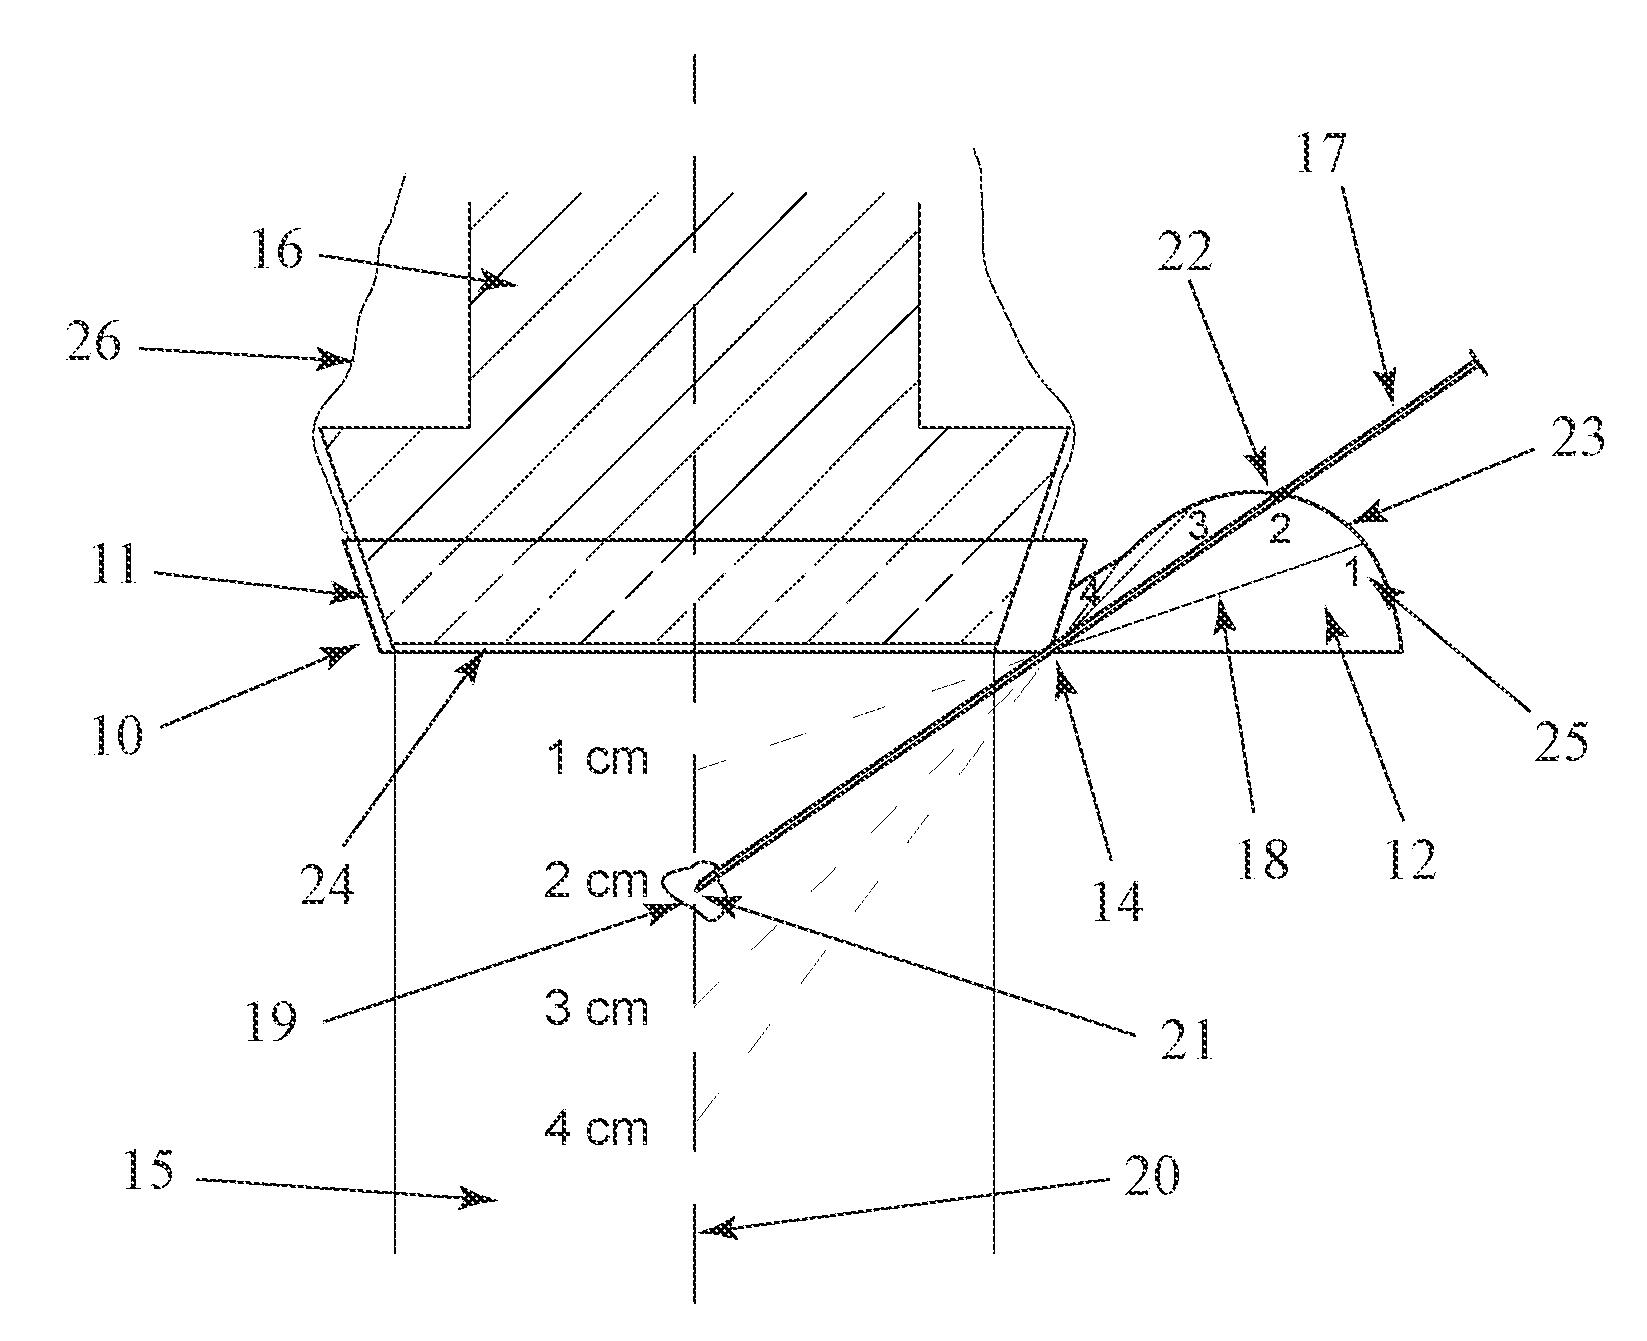 Apparatus for a needle director for an ultrasound transducer probe